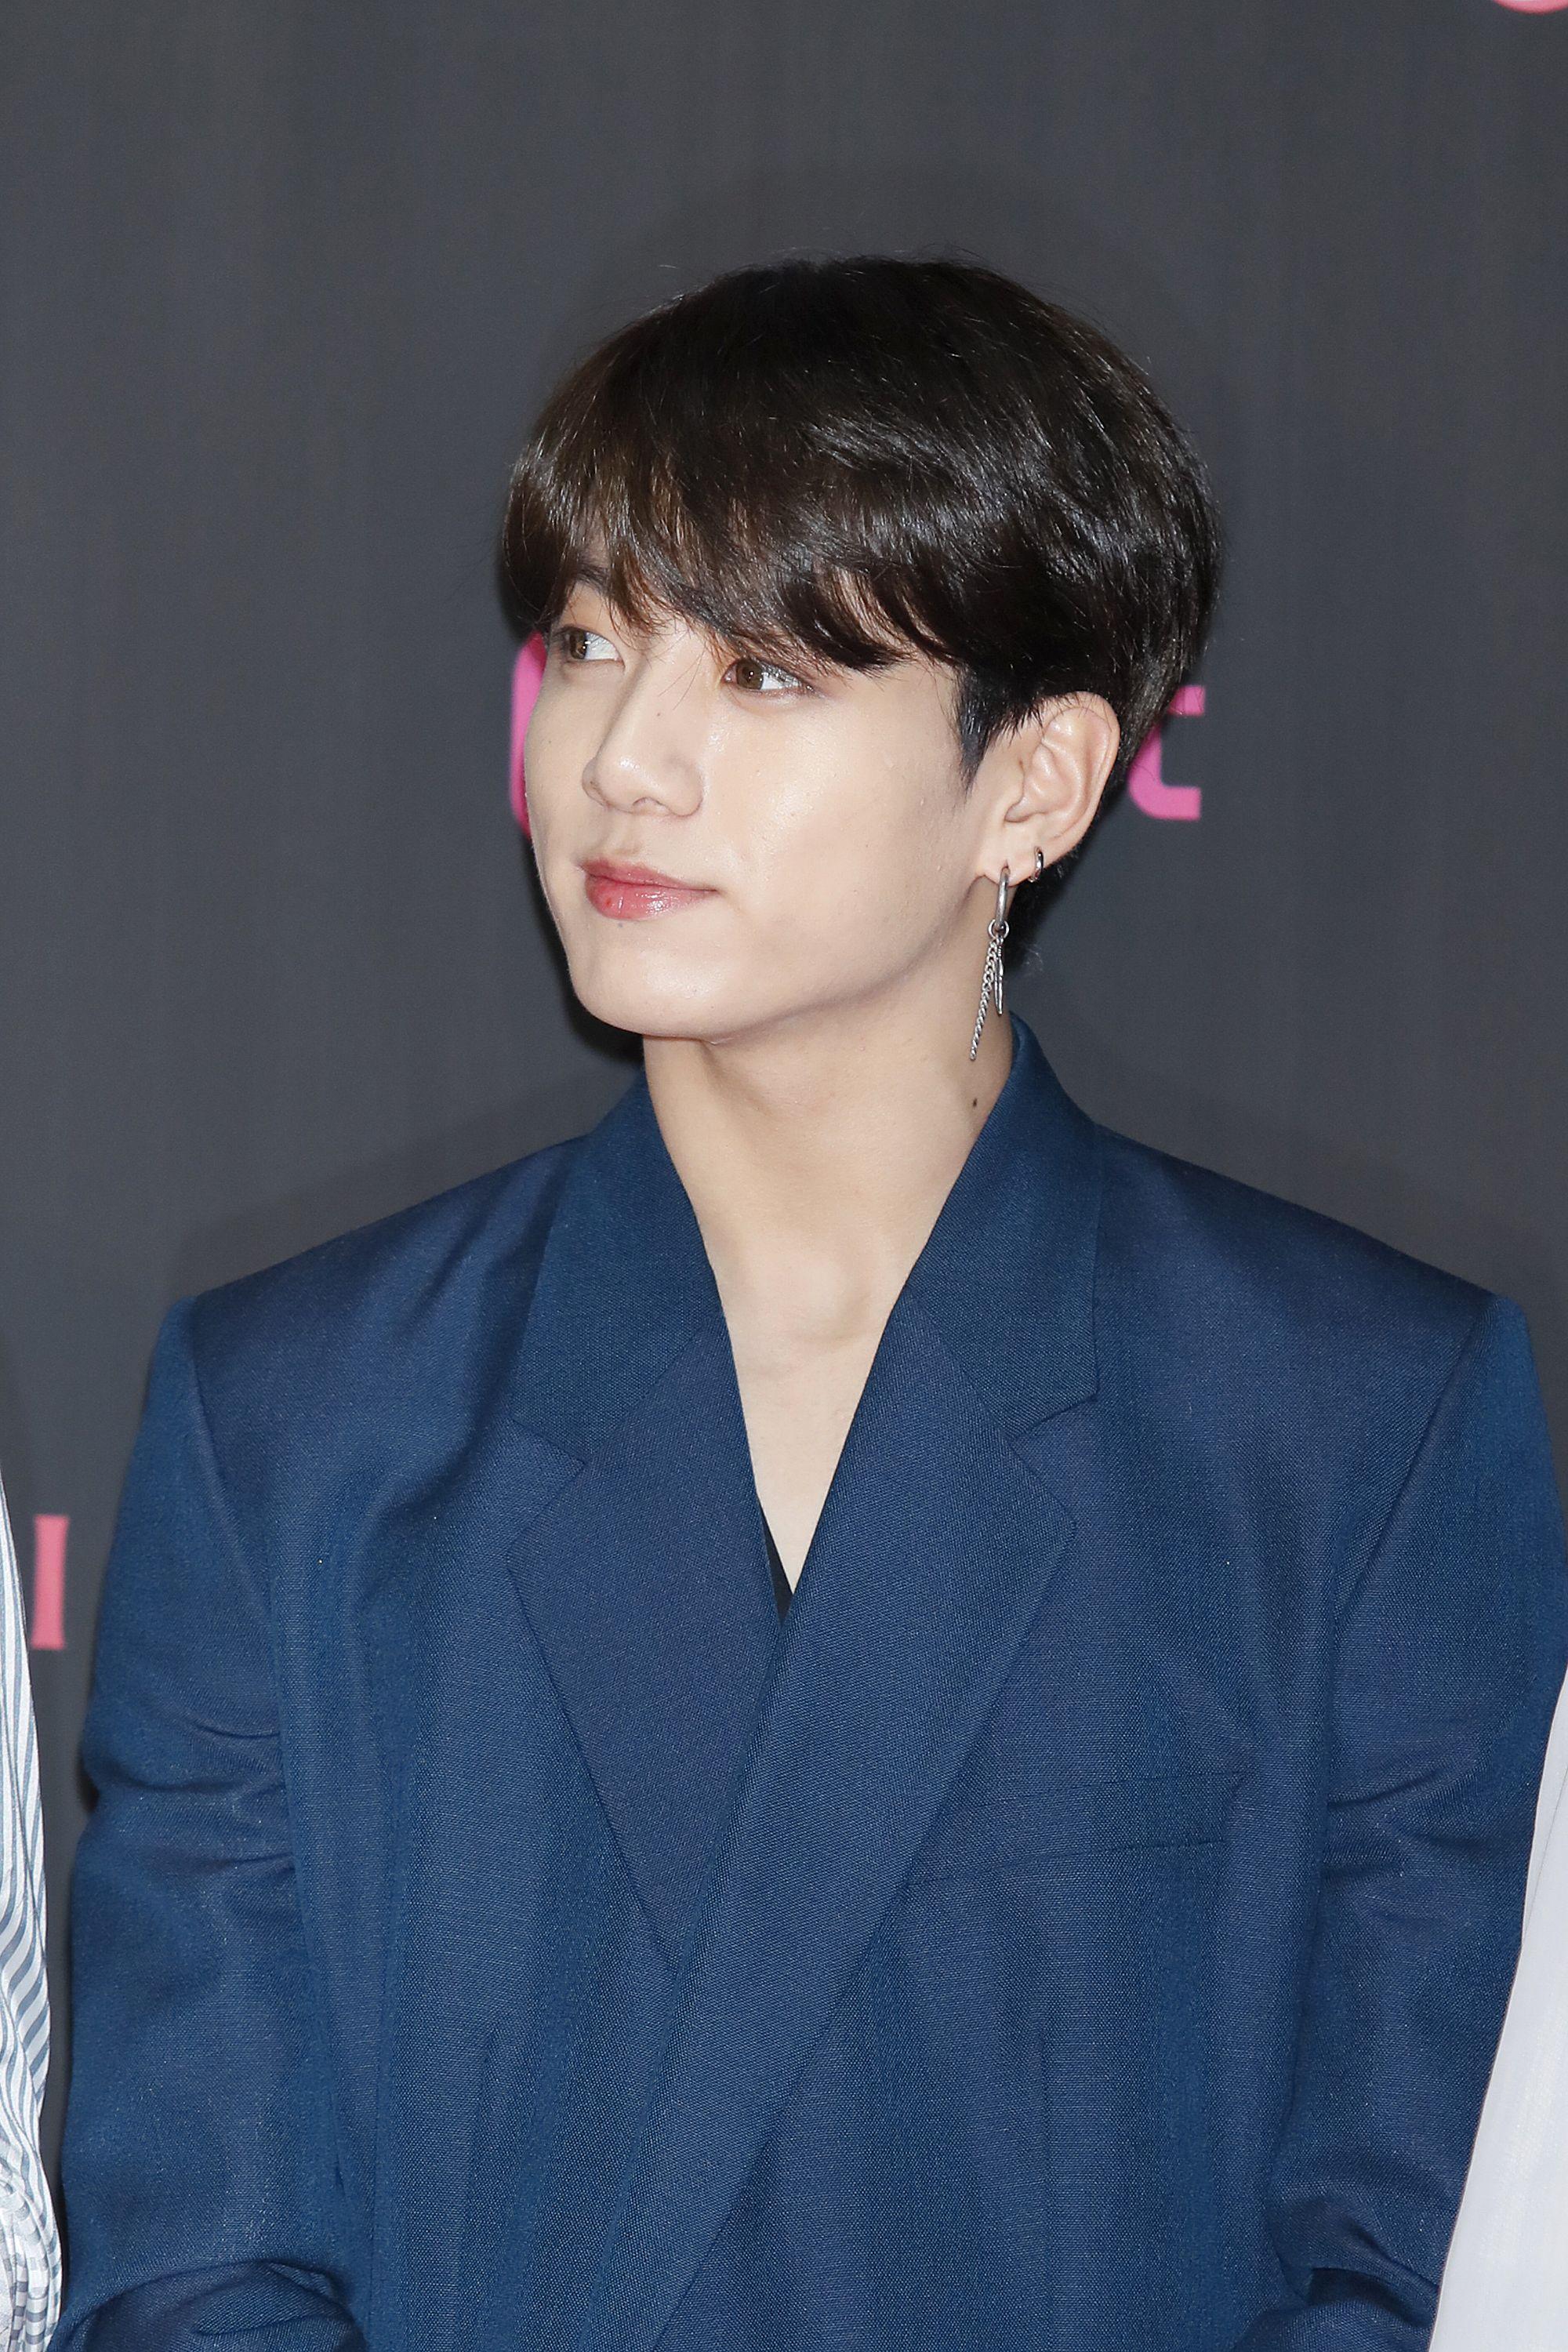 190424 The Fact Music Awards #BTS #JHOPE